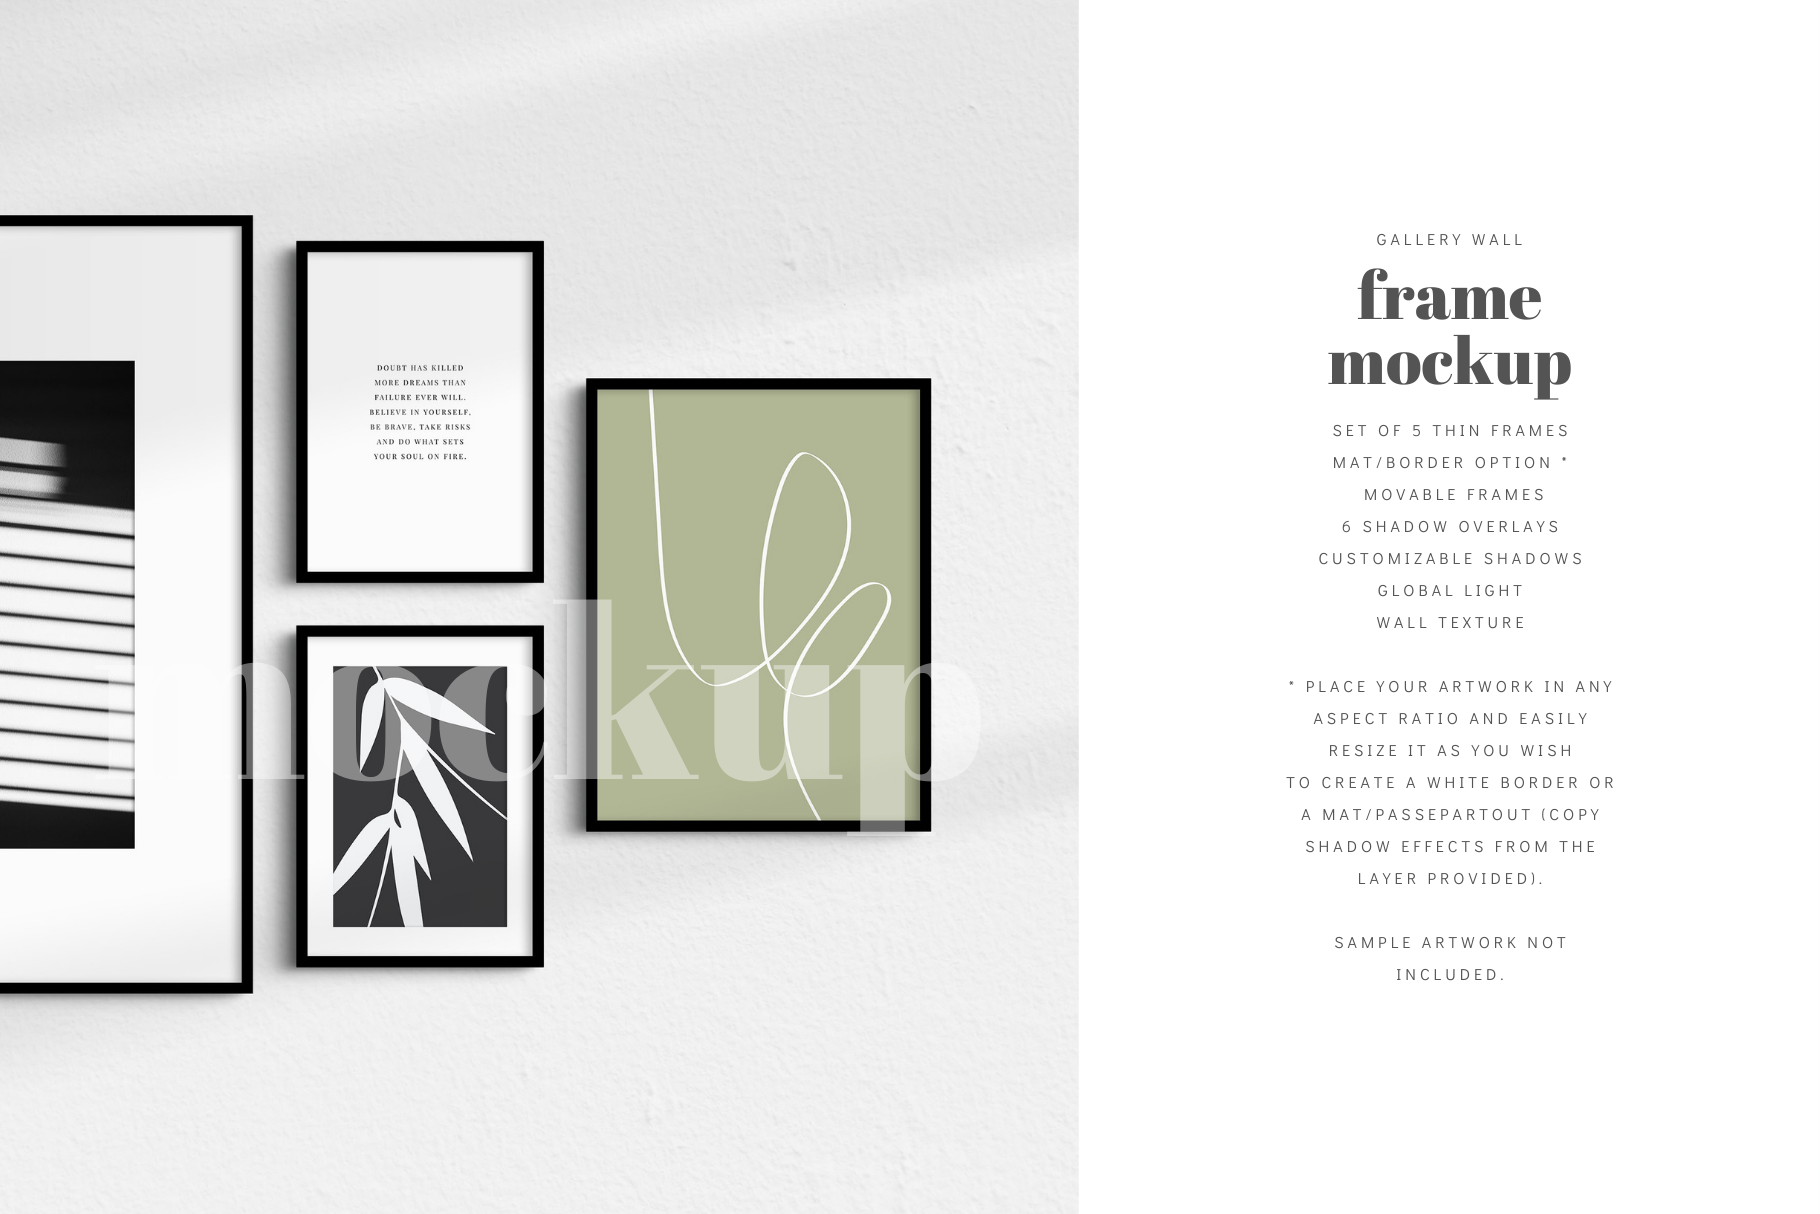 A modern, minimalist gallery wall mockup that features a set of 5 thin black frames.